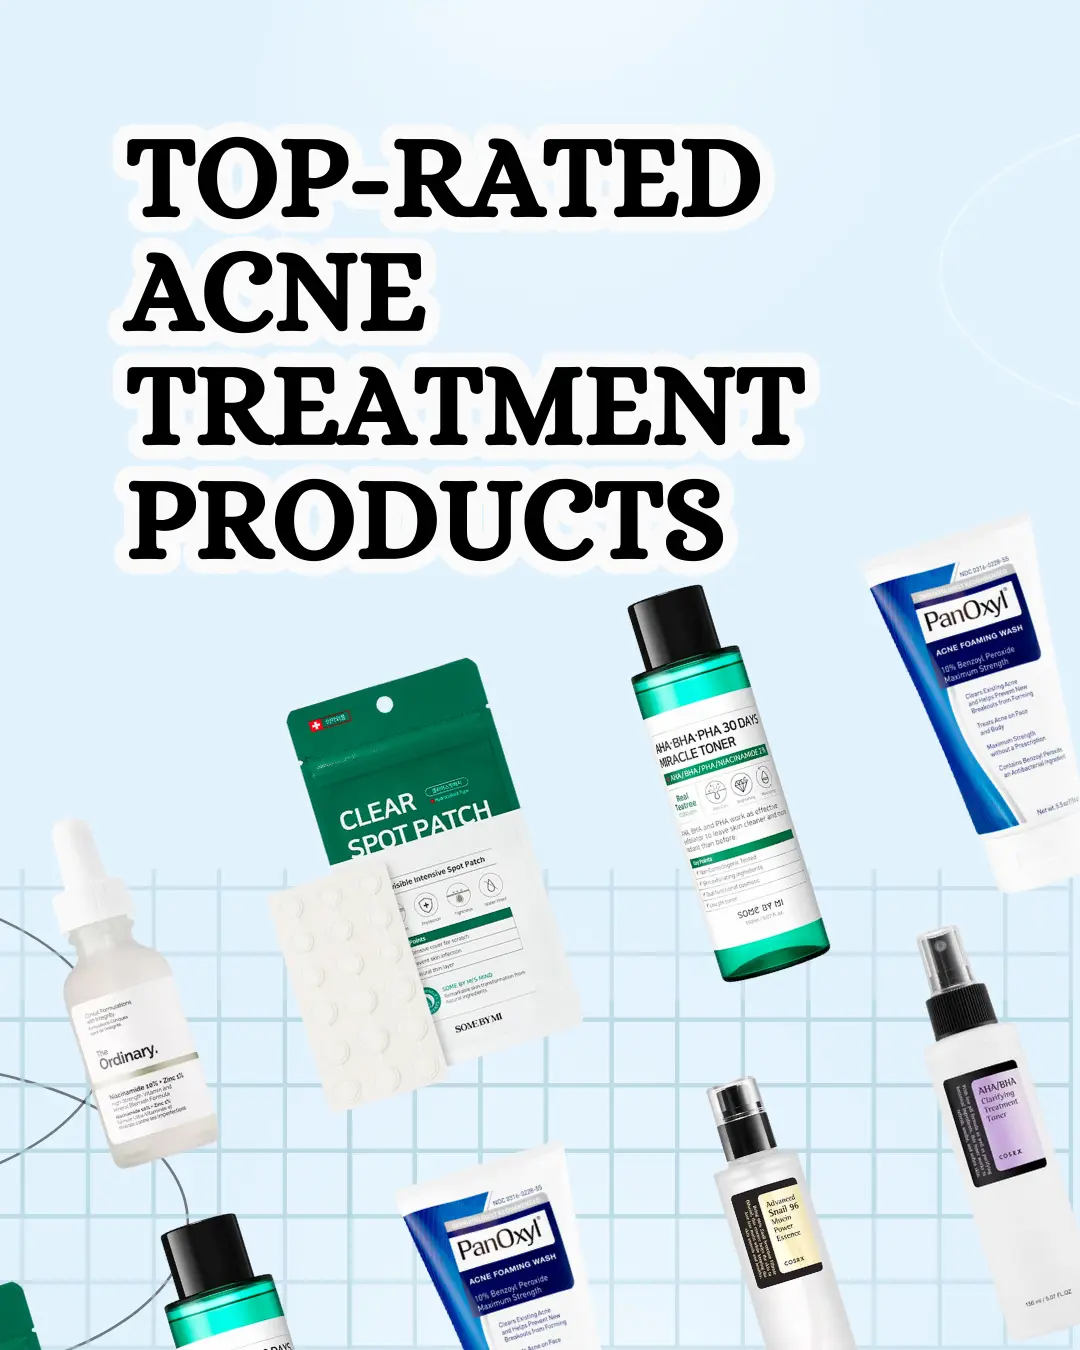 Top-Rated Acne Treatment Products for 2023's images